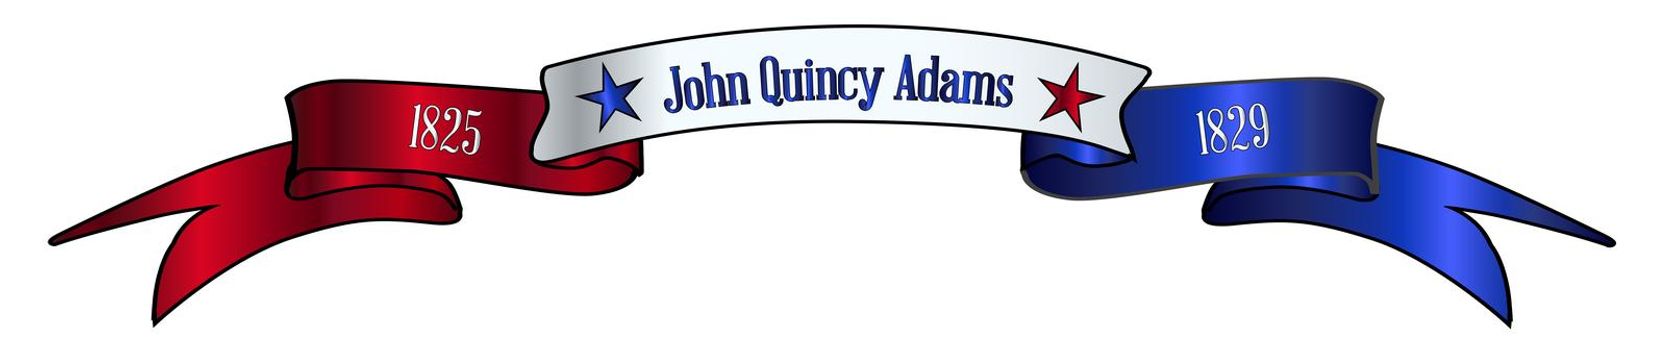 A red white and blue satin or silk ribbon banner with the text John Quincy Adams and stars and date in office